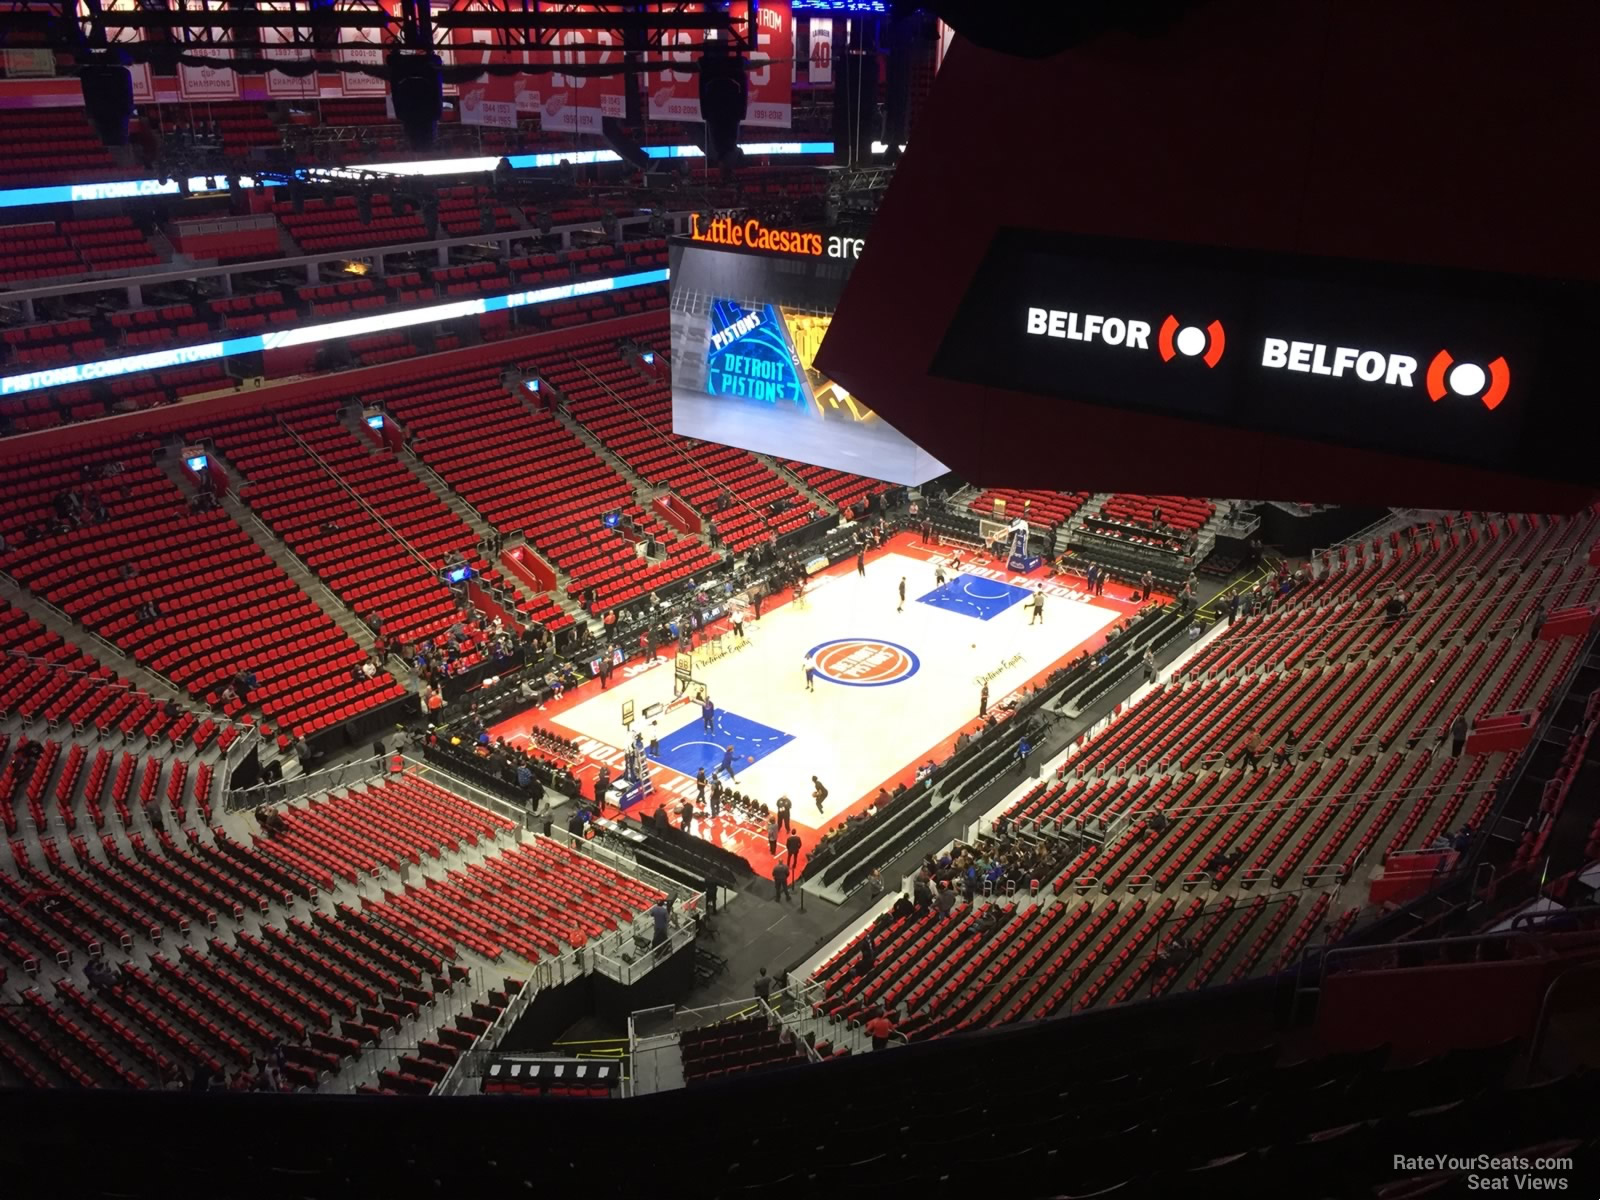 section 216, row 11 seat view  for basketball - little caesars arena